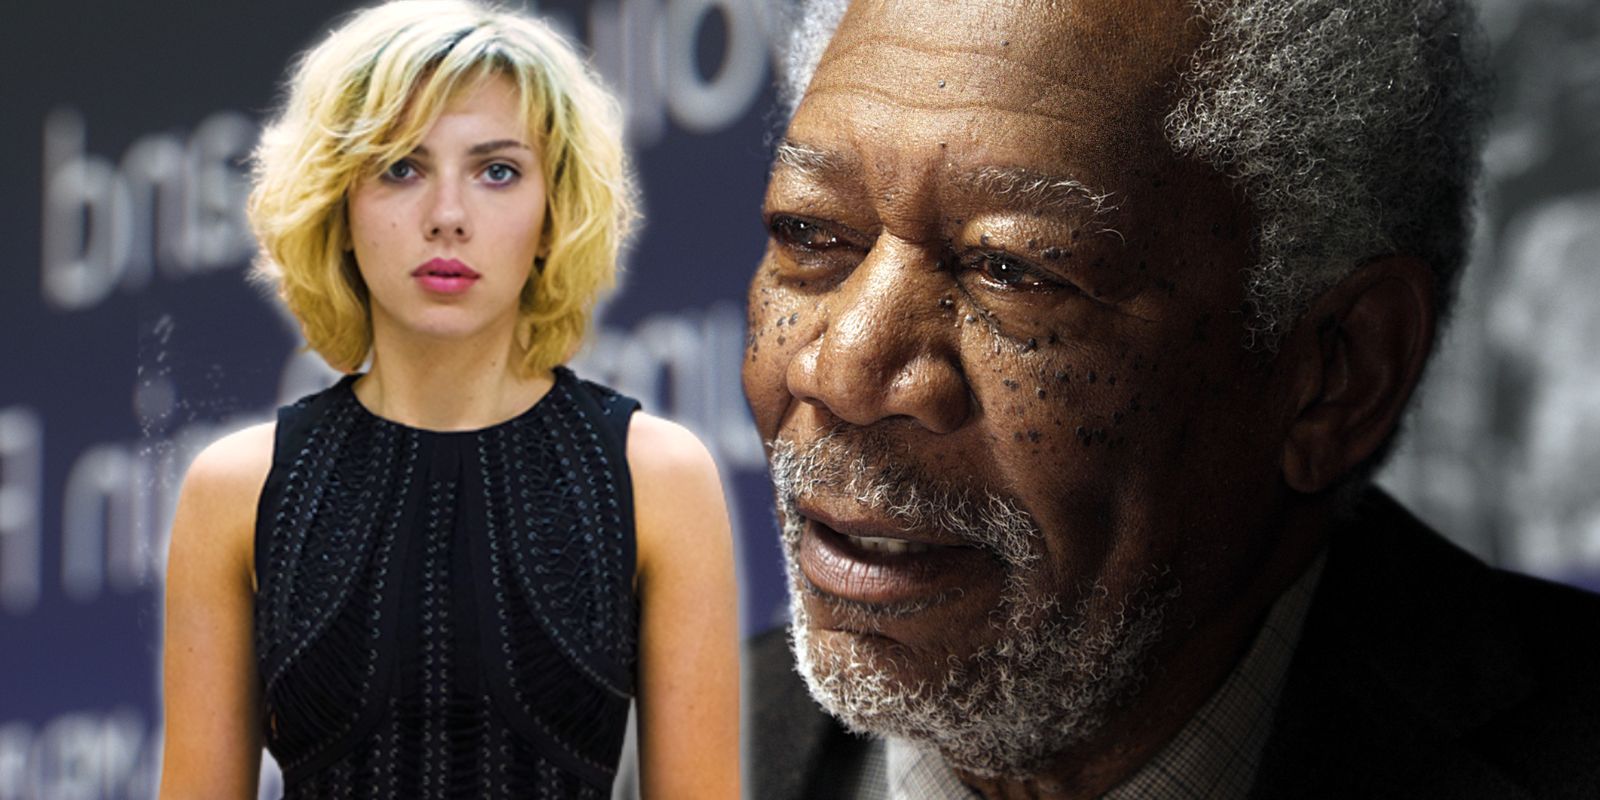 Scarlett Johansson as Lucy standing next to a quizzical Morgan Freeman